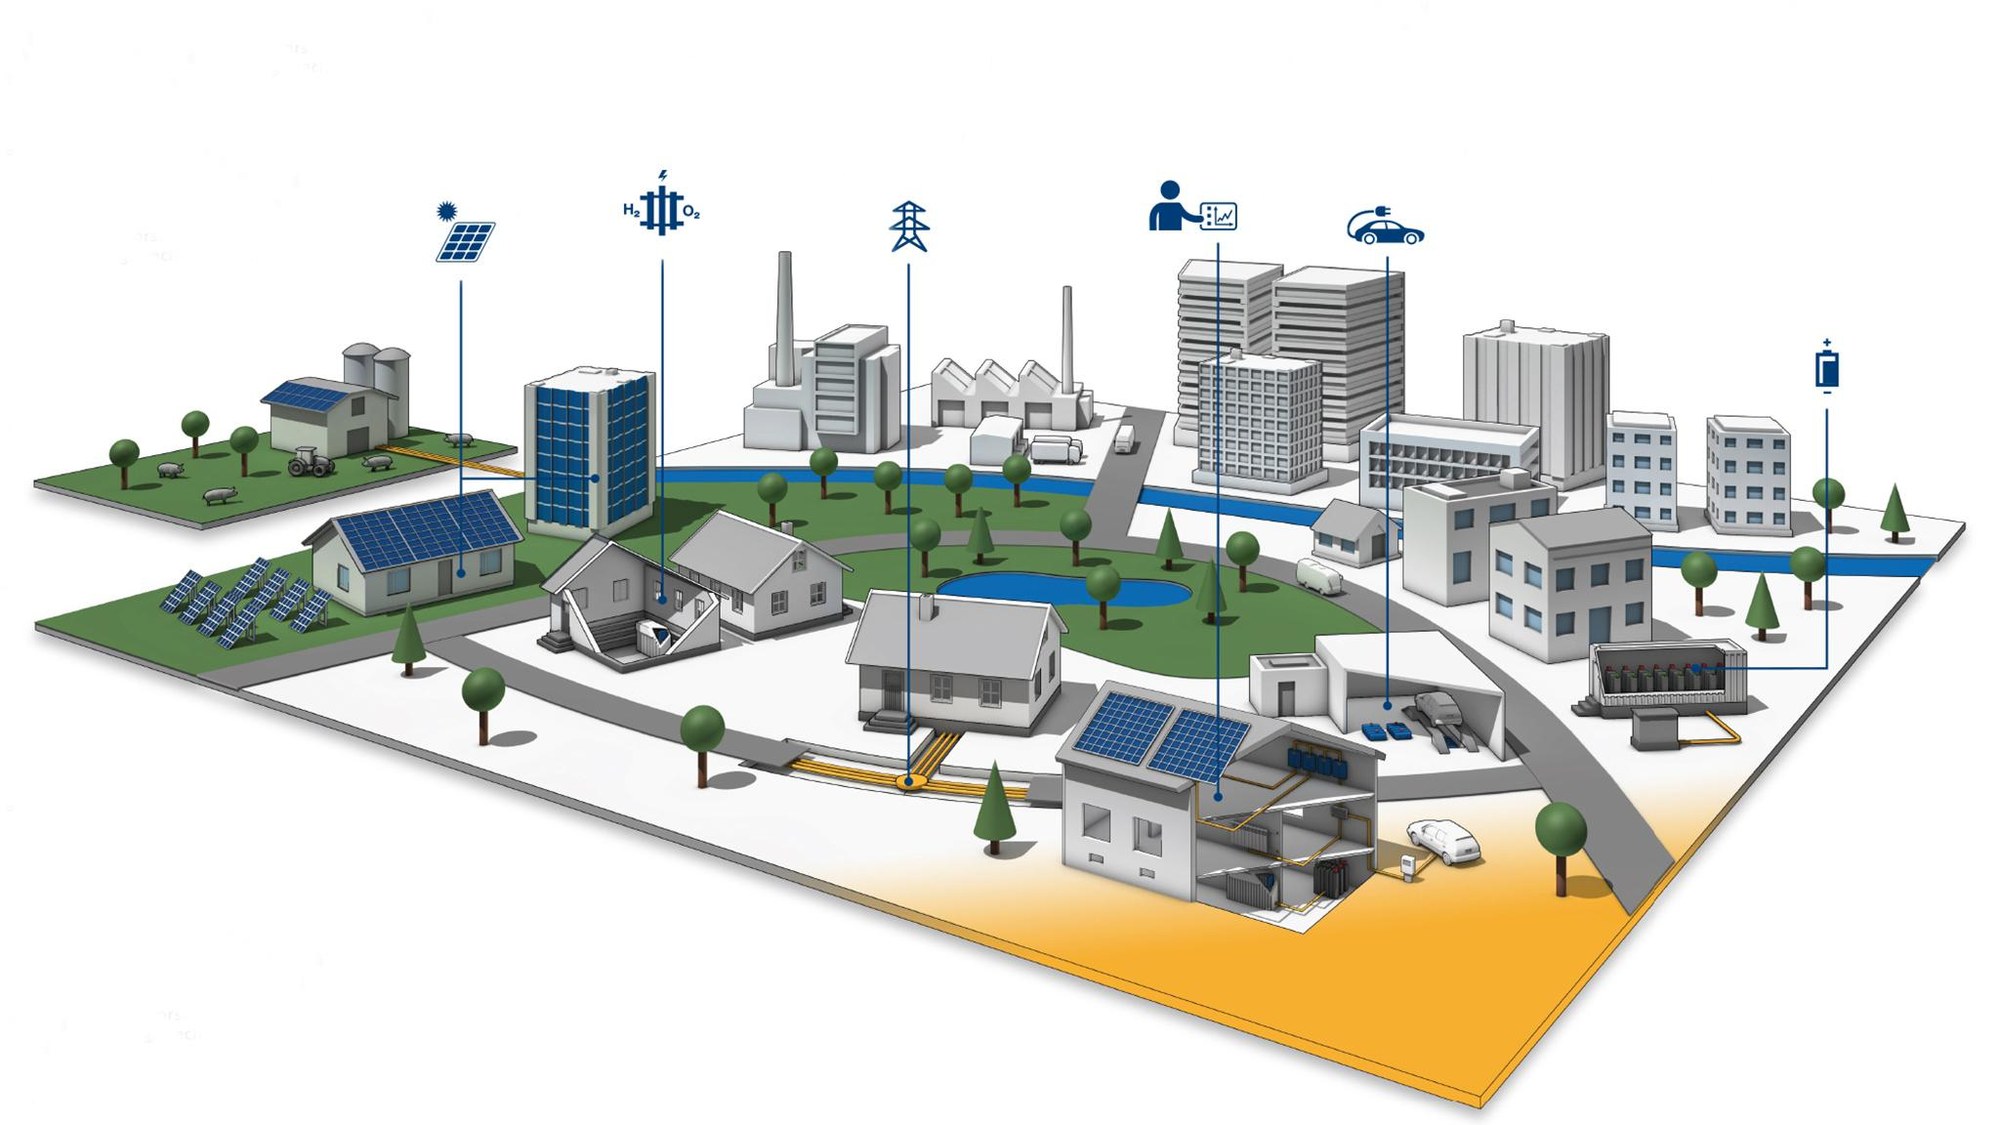 Energy management for the city of tomorrow